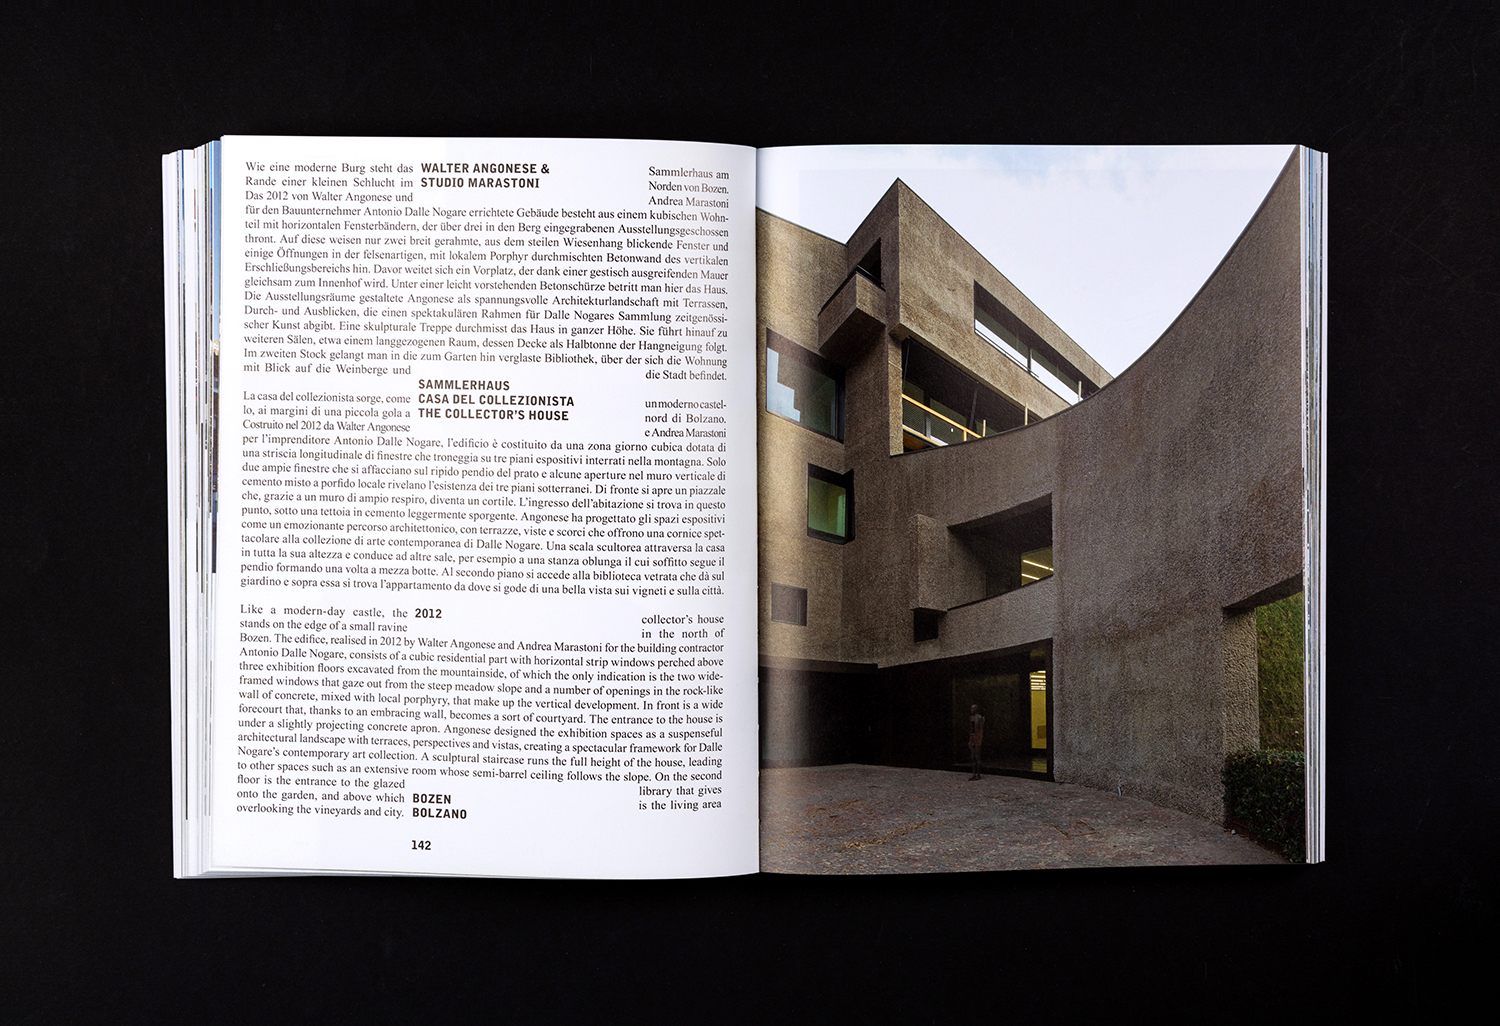 Book design and layout by Studio Mut for New Architecture in South Tyrol